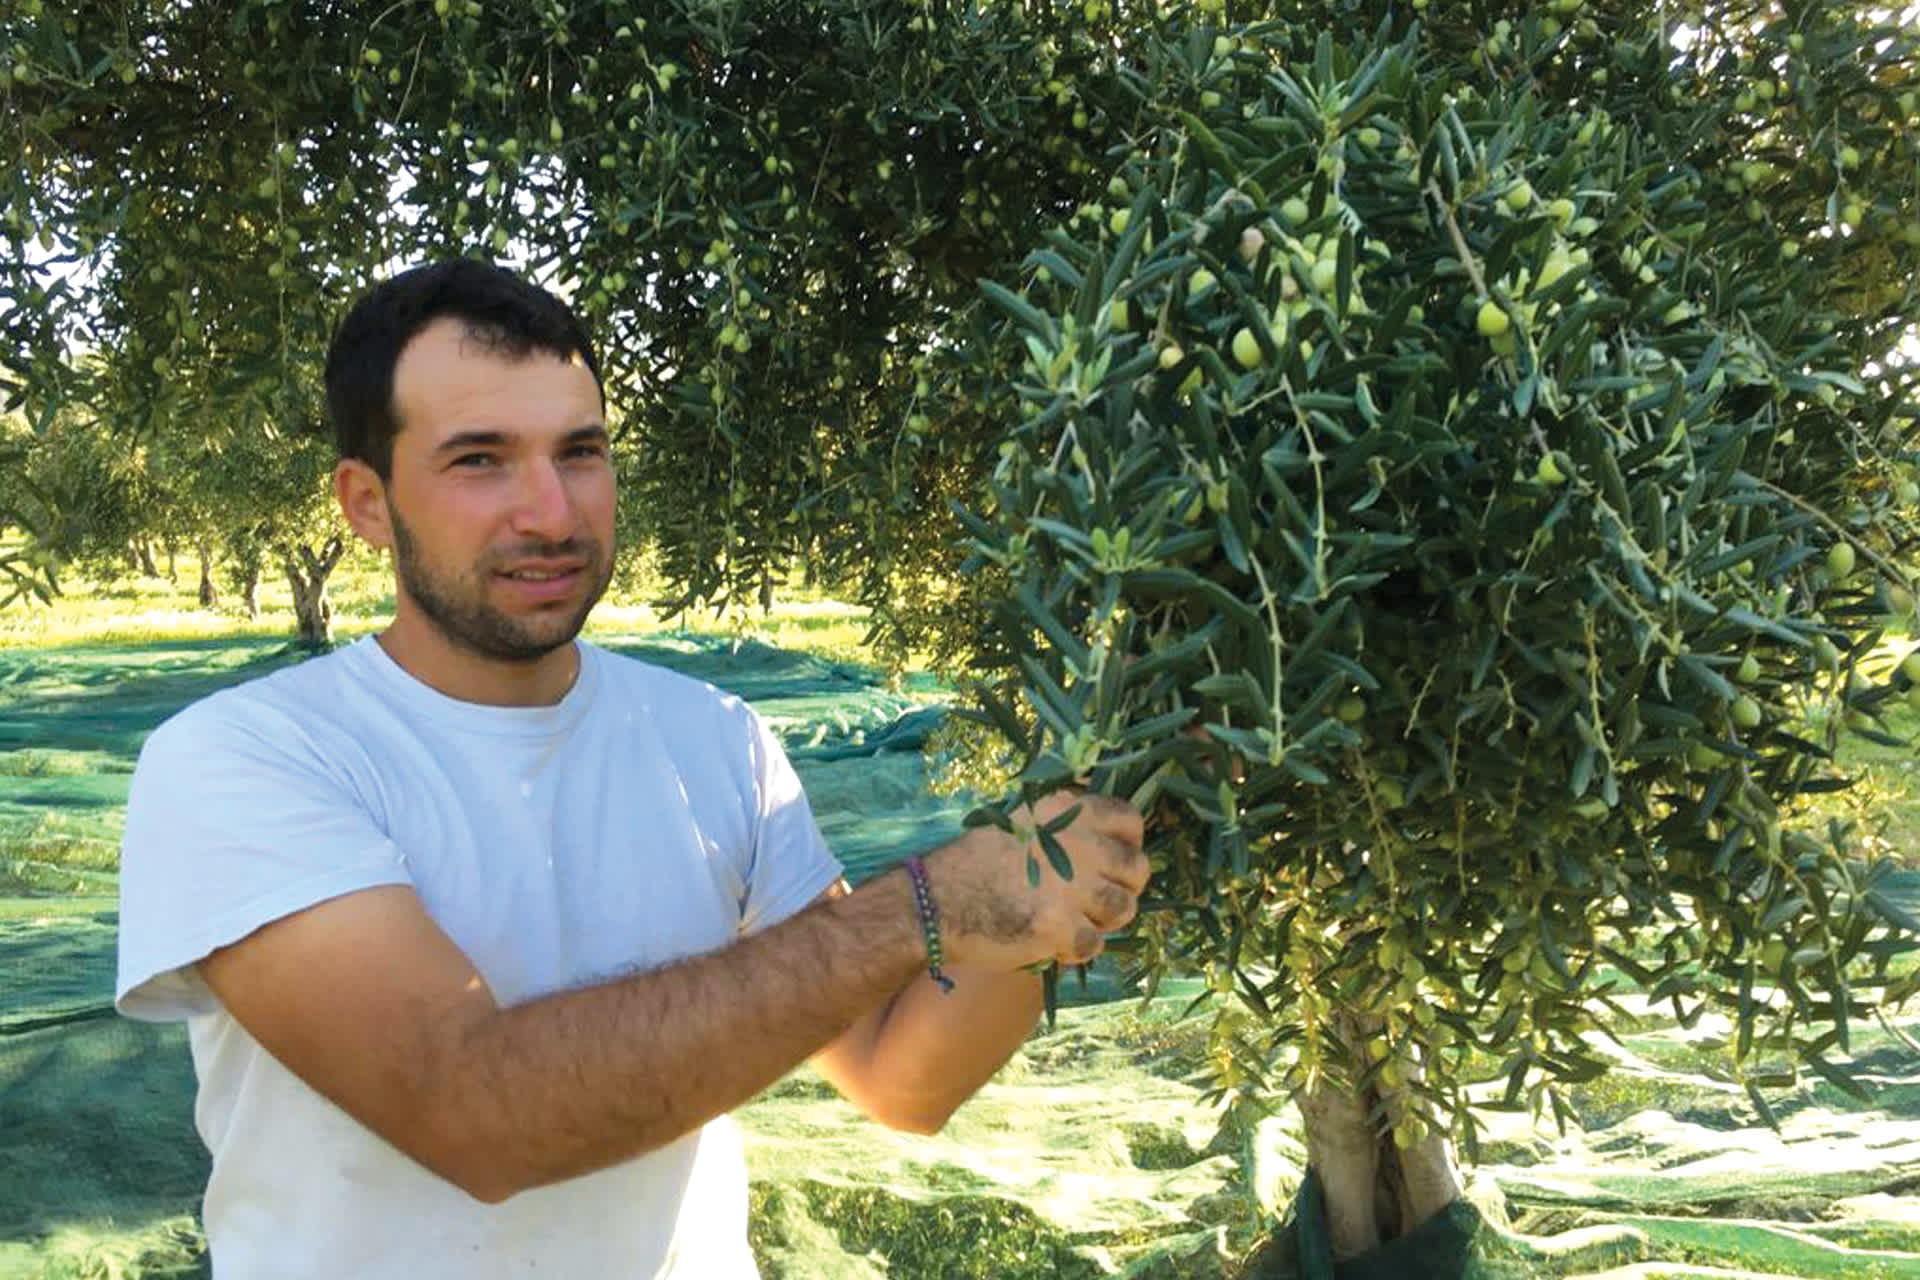 a man in a white shirt picks olives from a tree